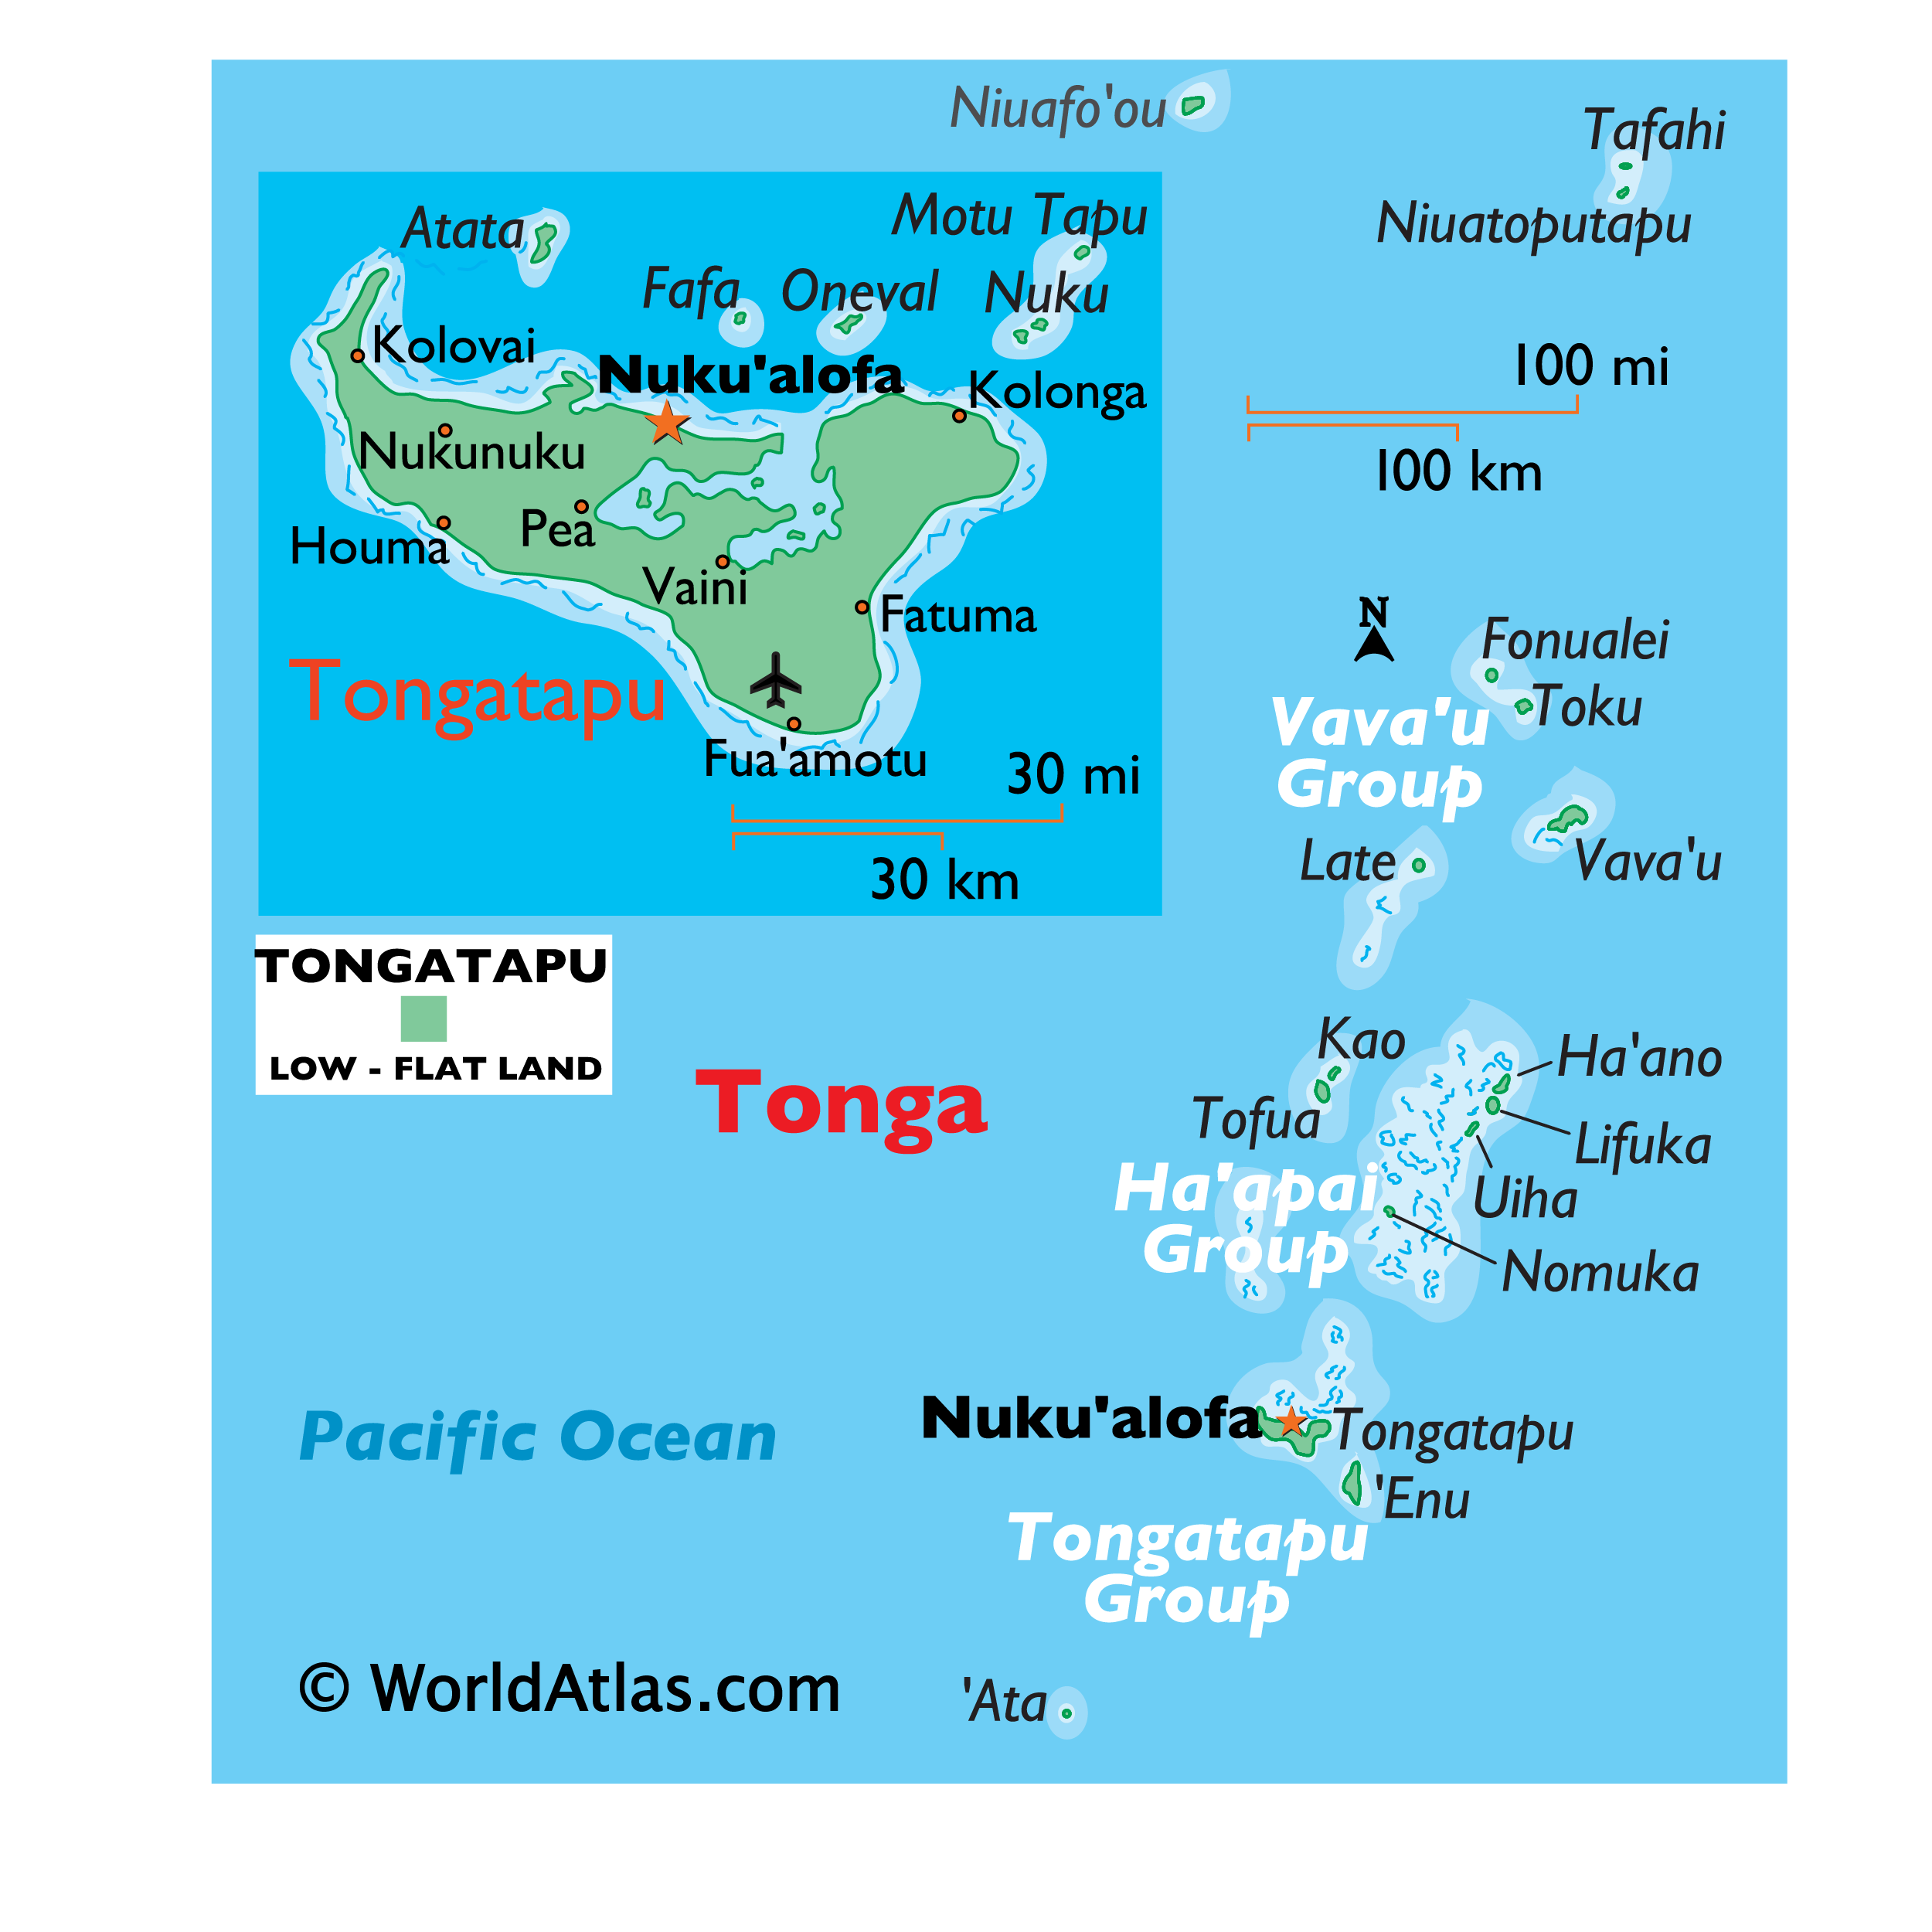 Physical Map of Tonga showing islands, relief, important settlements, etc.